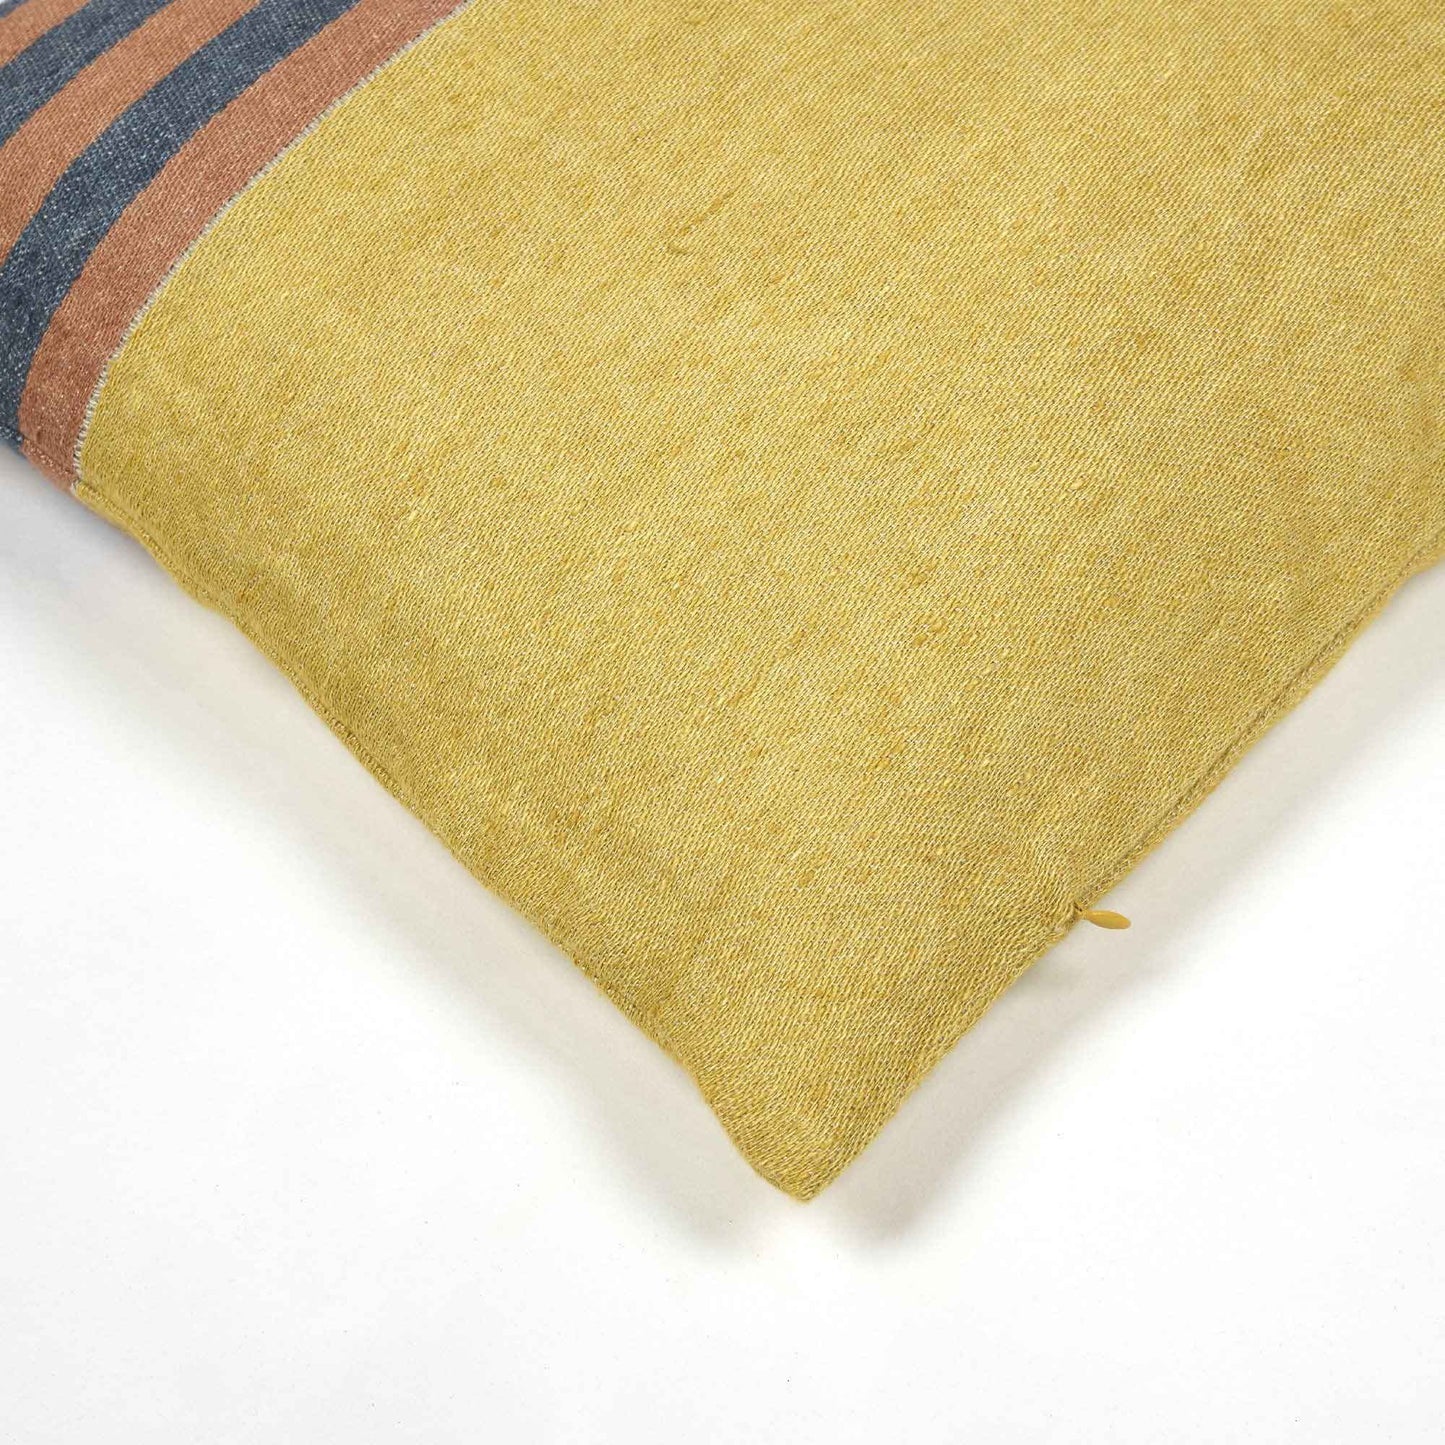 Belgian linen throw pillow cover corner detail shot in color Red Earth by Libeco for South Hous.